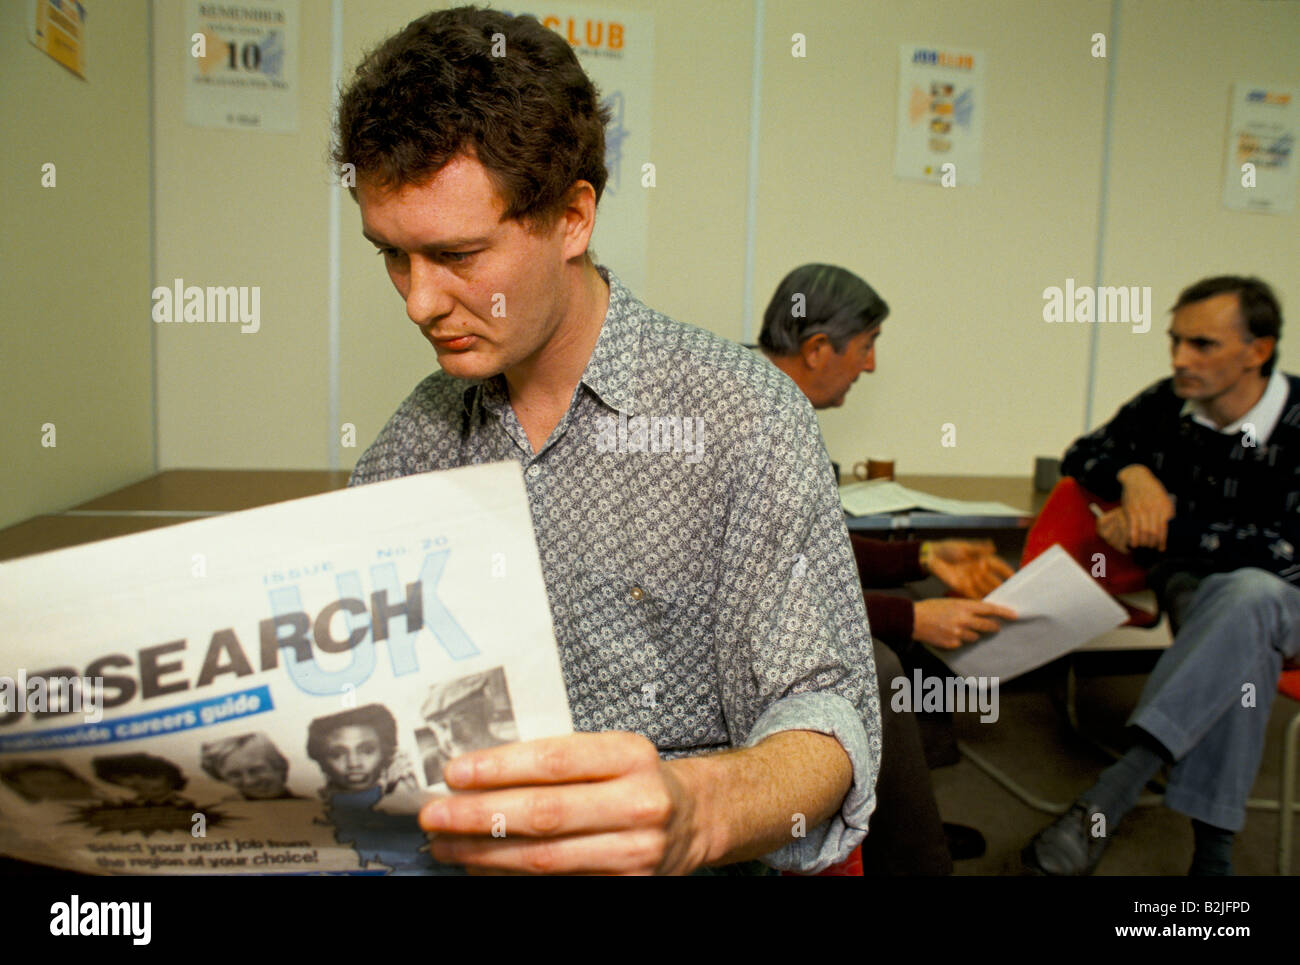 Man reading a jobsearch newspaper in an executive job club in Wiltshire, UK. Stock Photo